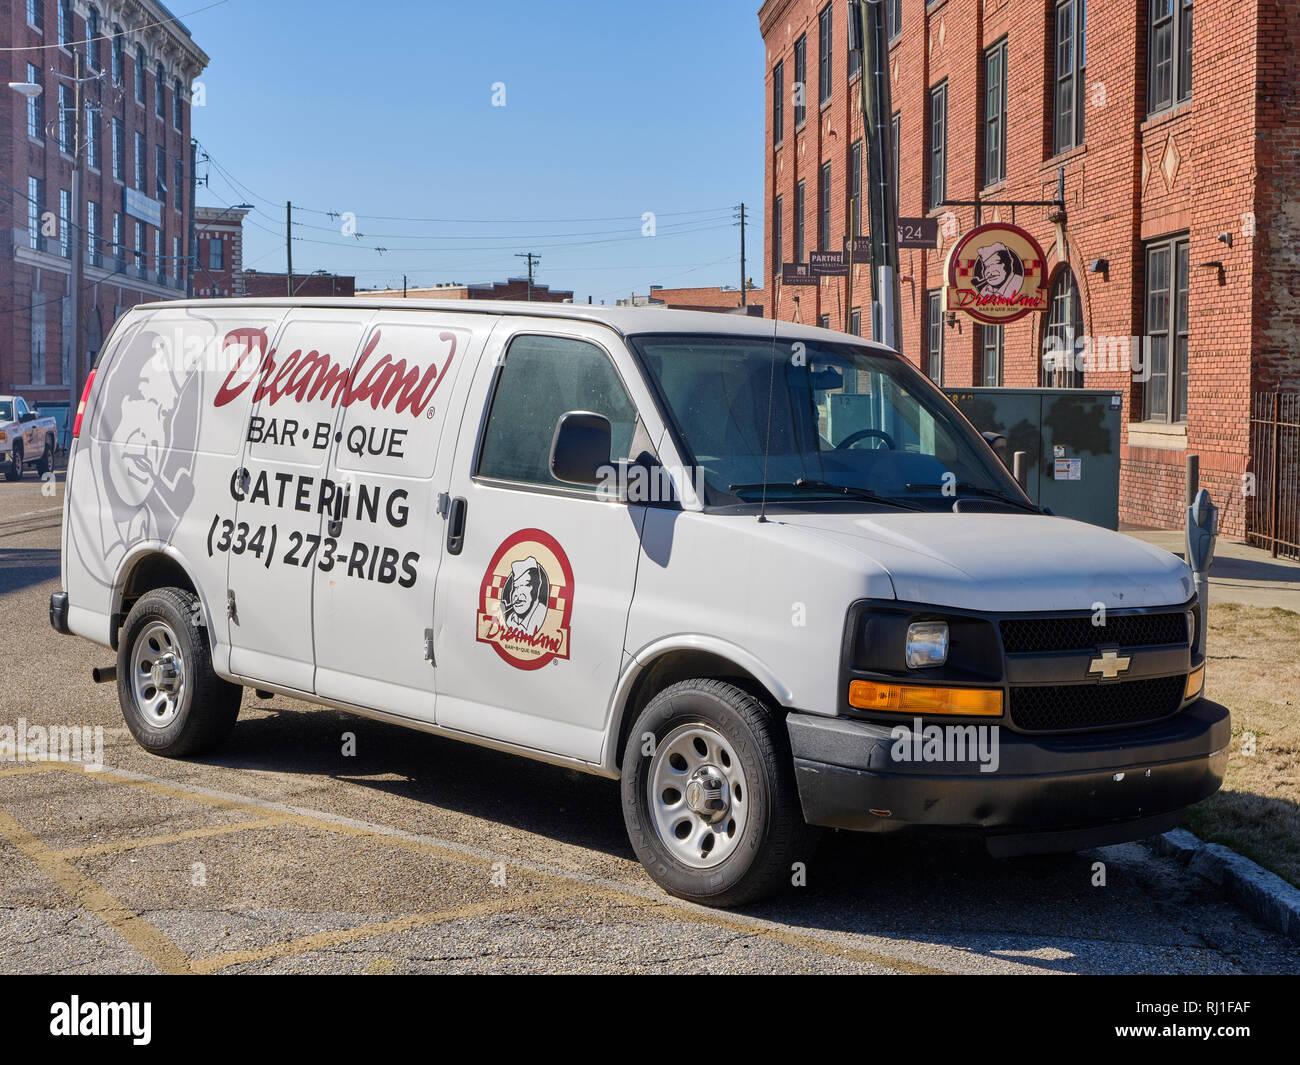 Dreamland BBQ or barbecue catering delivery truck parked with the business sign in background in Montgomery Alabama, USA. Stock Photo